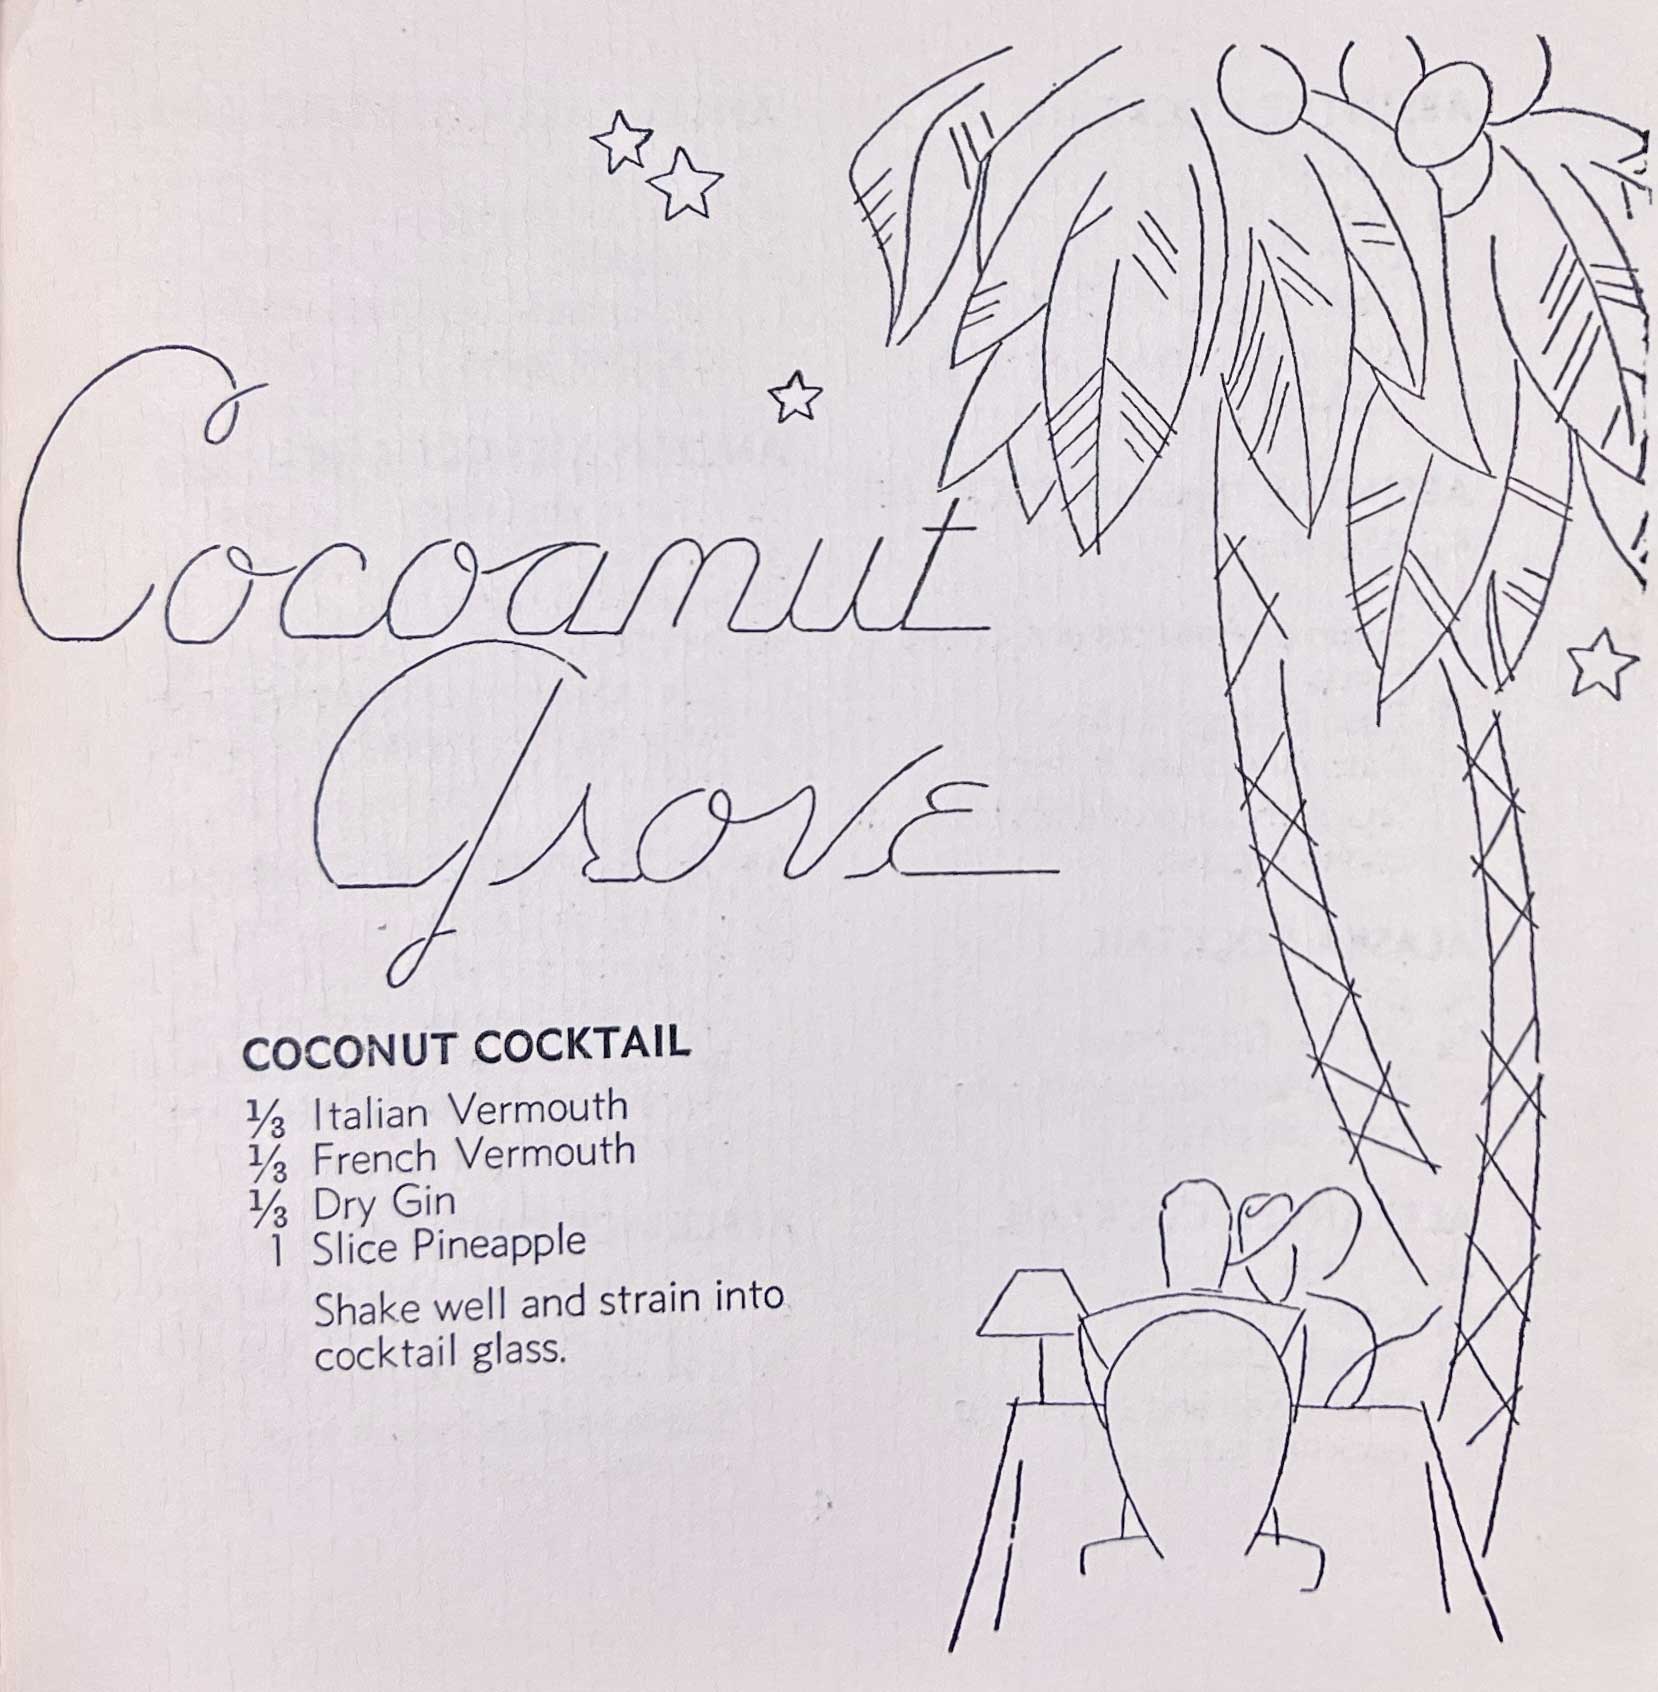 https://library.cocktailkingdom.com/tl-images-treasures/hollywood-cocktails.01-coconut-grove.jpg